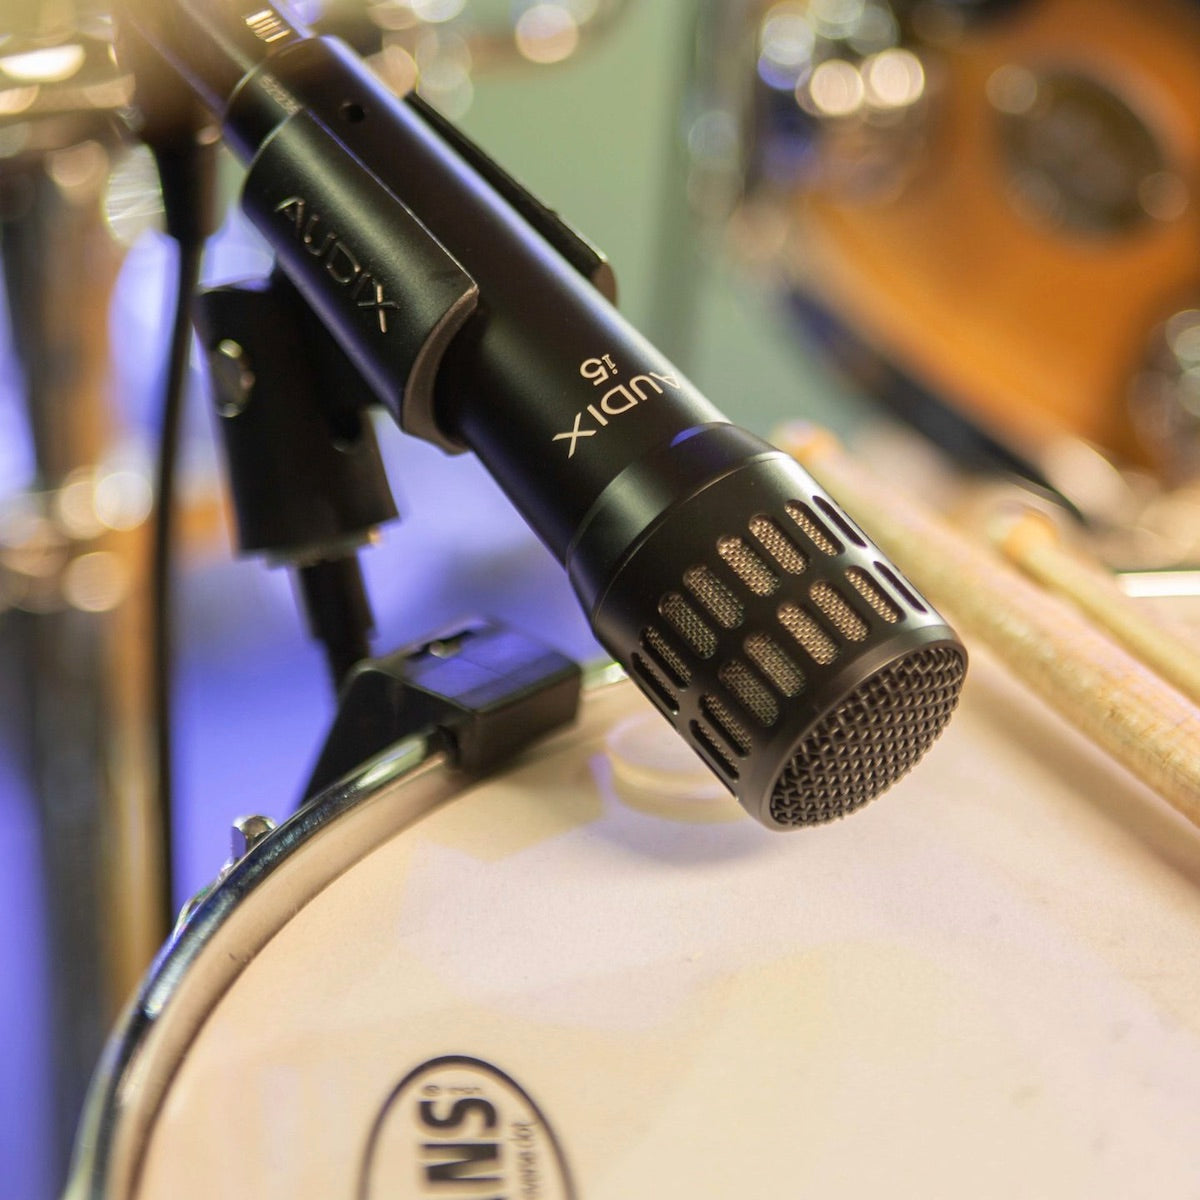 Audix i5 Dynamic Instrument Microphone mounted on a snare drum